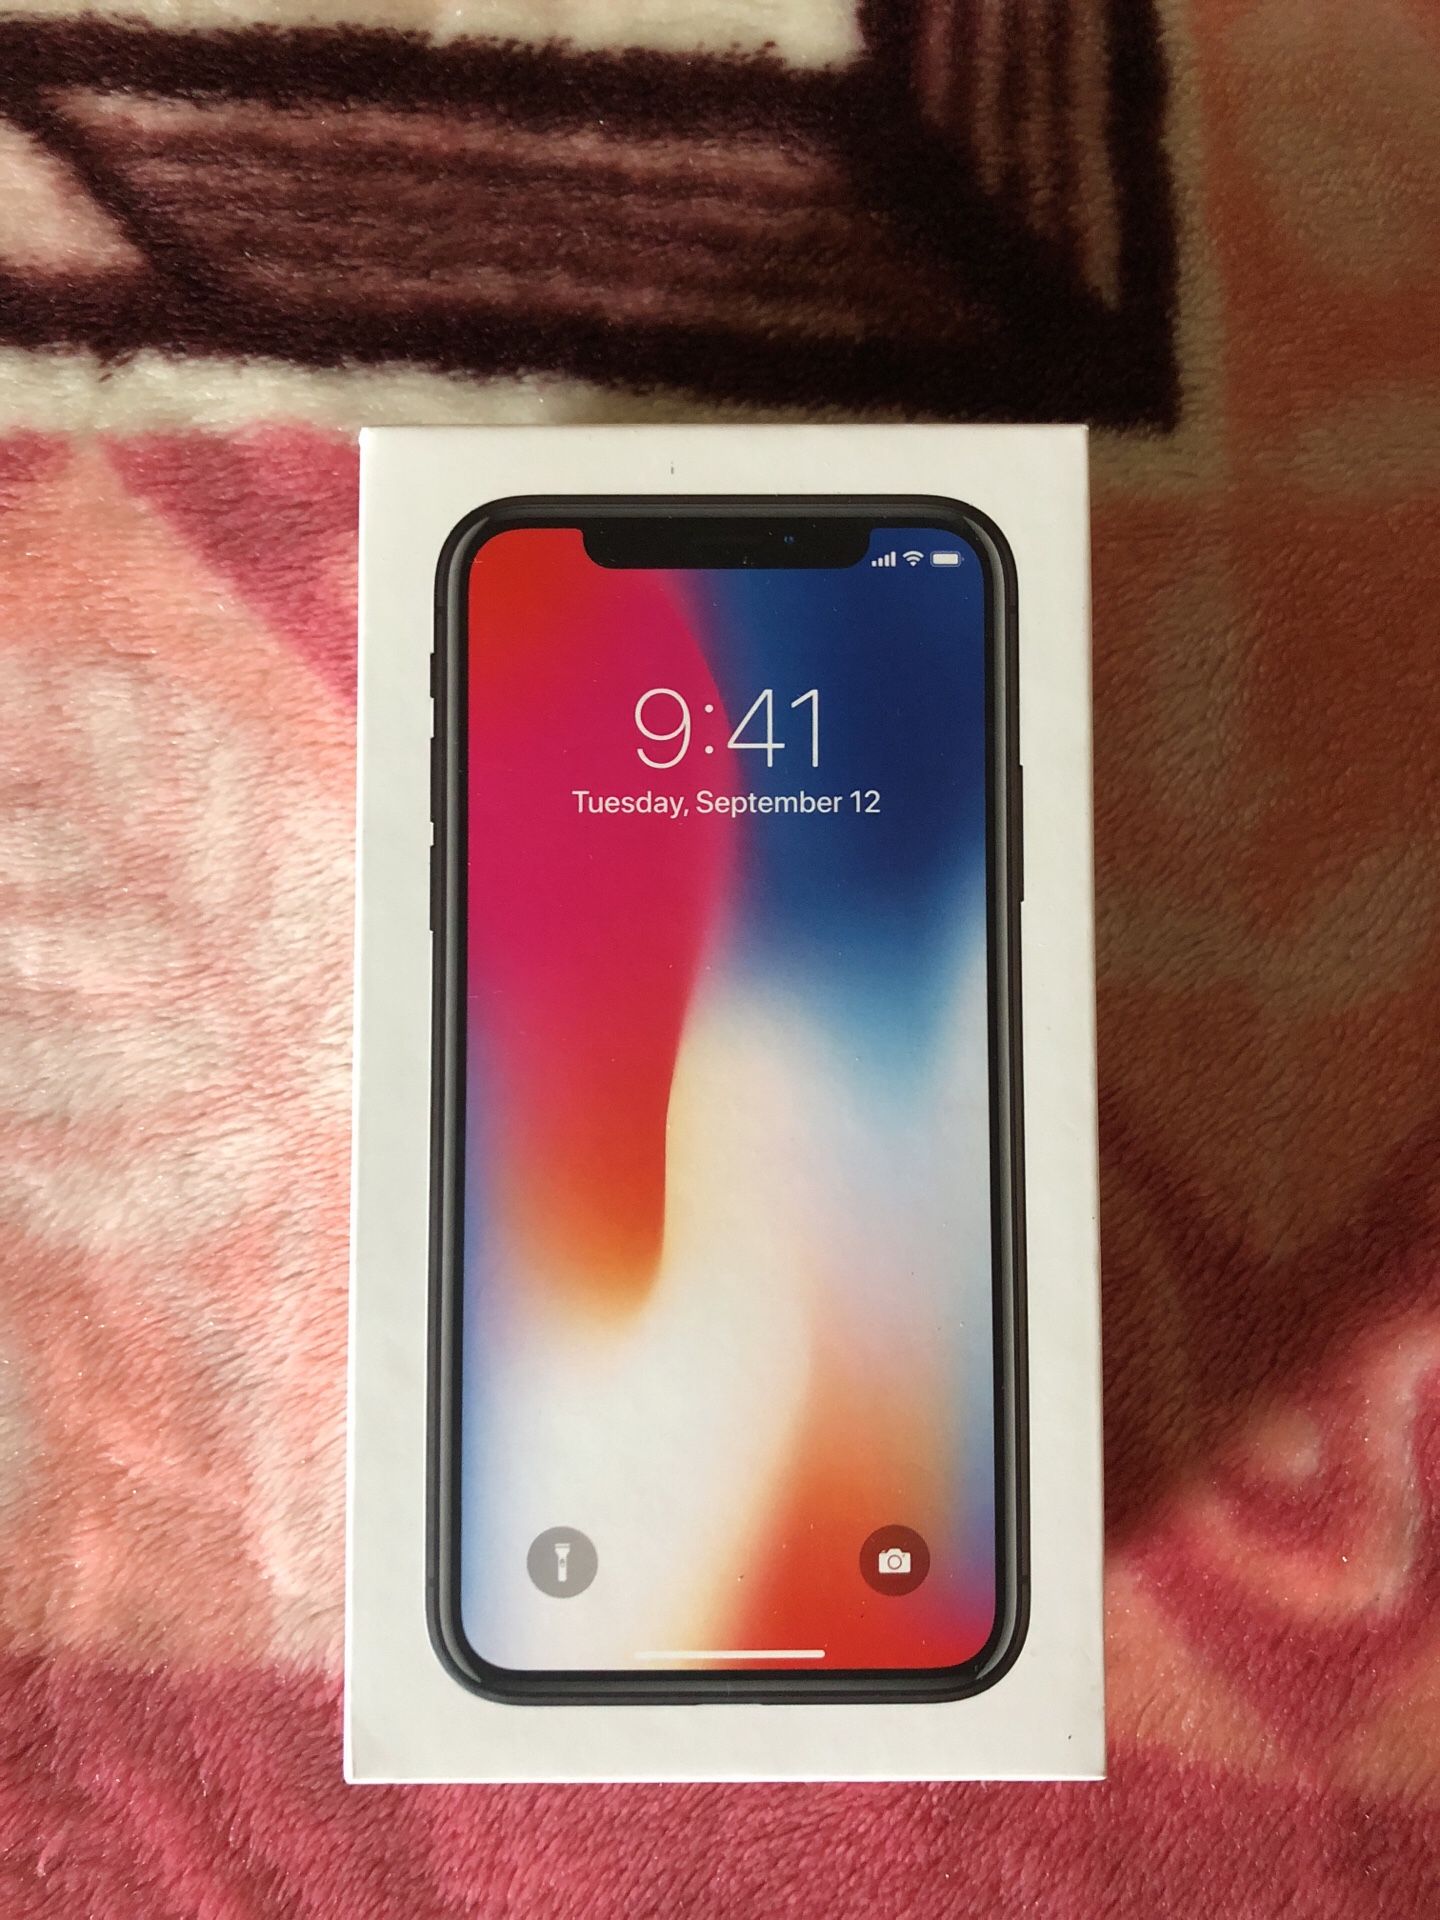 iPhone X 256GB Verizon can be unlocked to any carrier